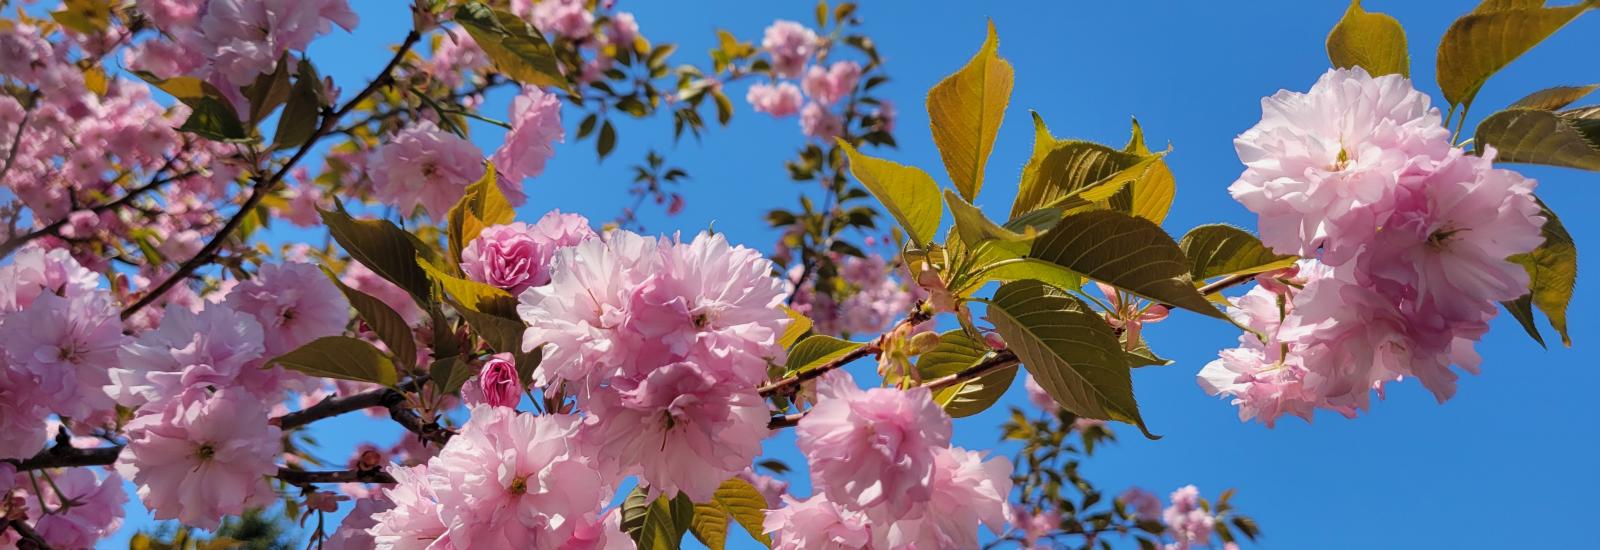 A tree branch with pink blossoms and blue sky